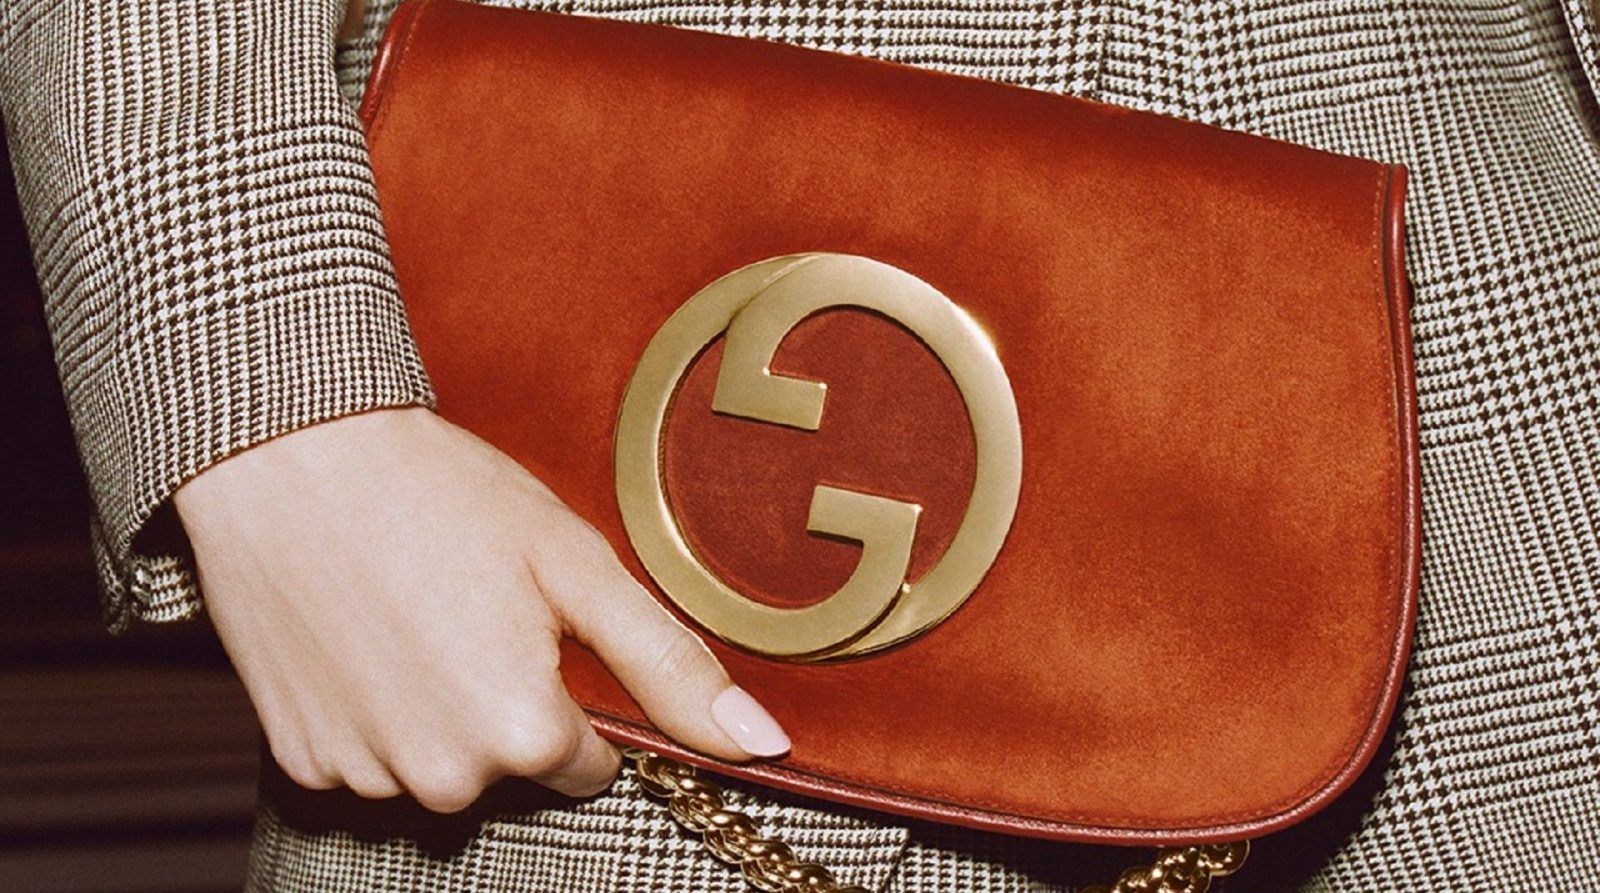 Gucci is now the world's hottest brand, according to The Lyst Index